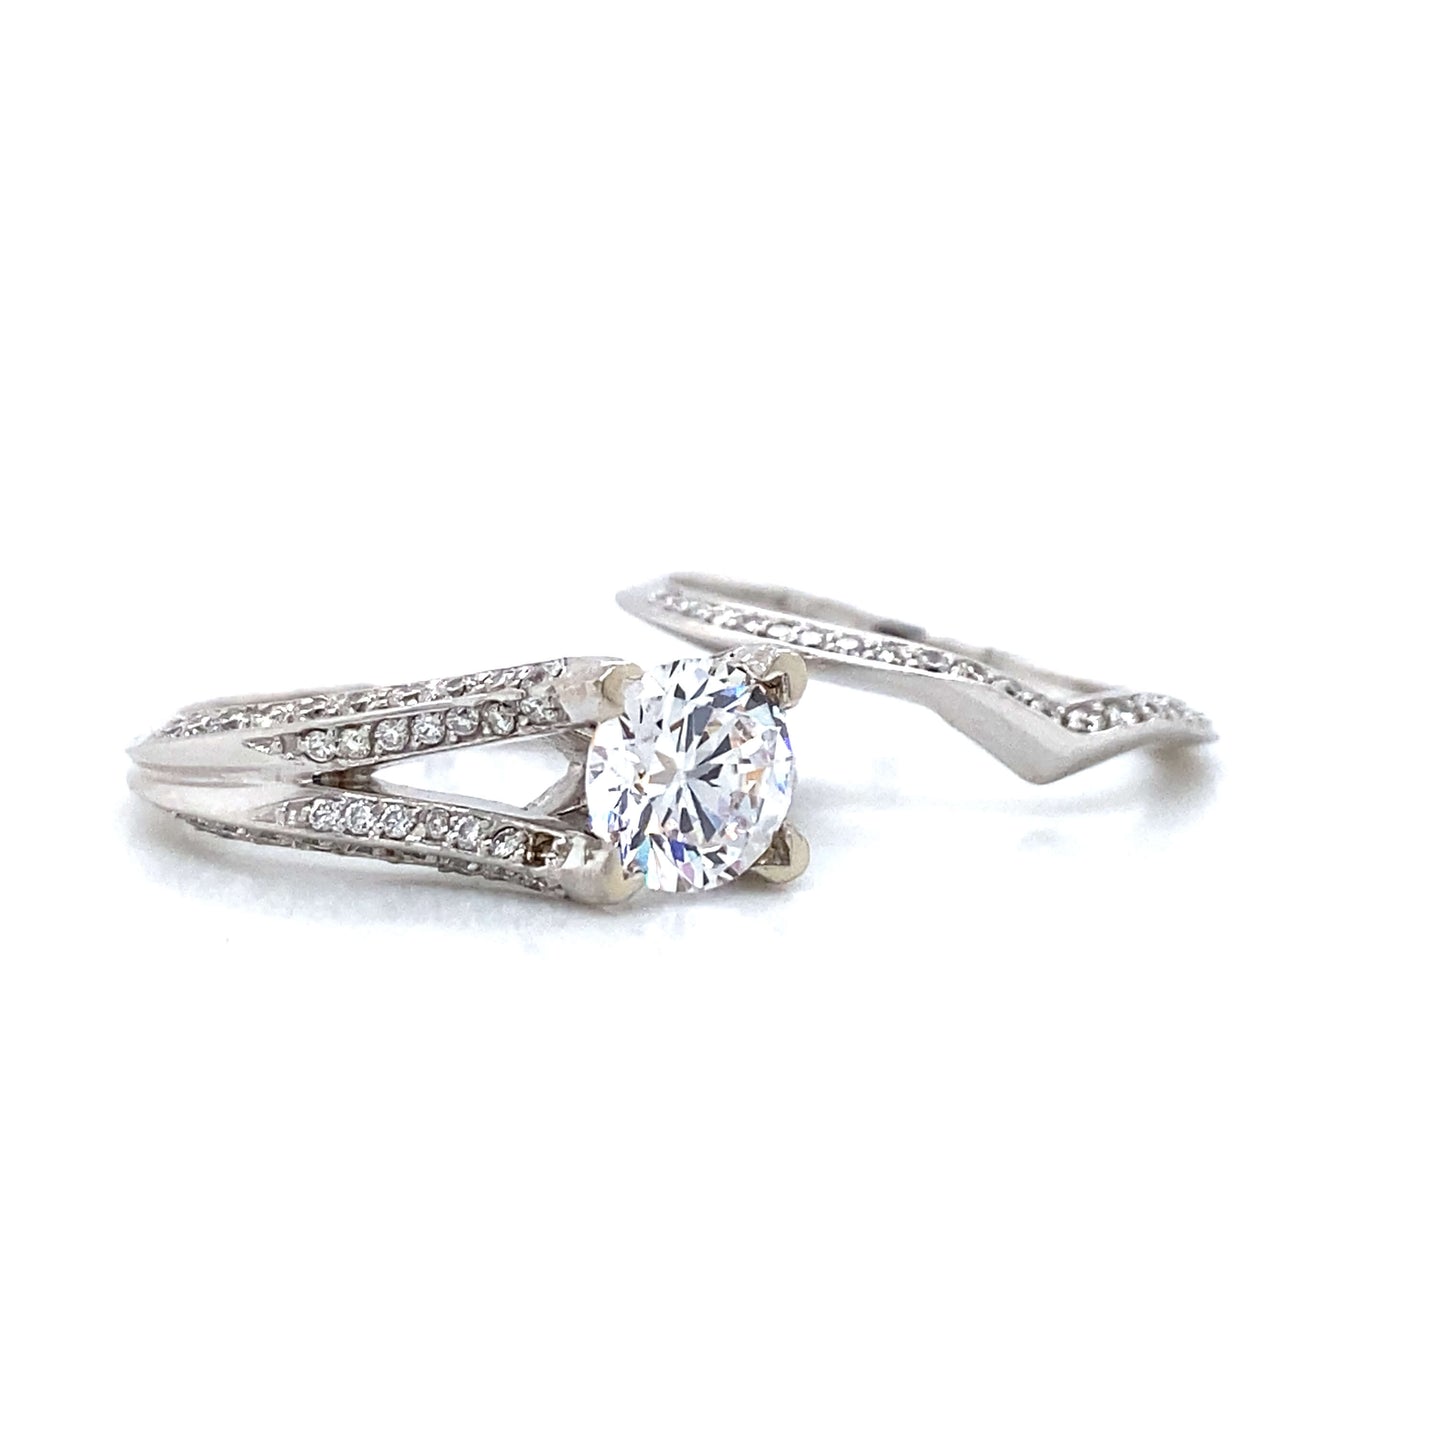 Pave Engagement Set in 14K White Gold